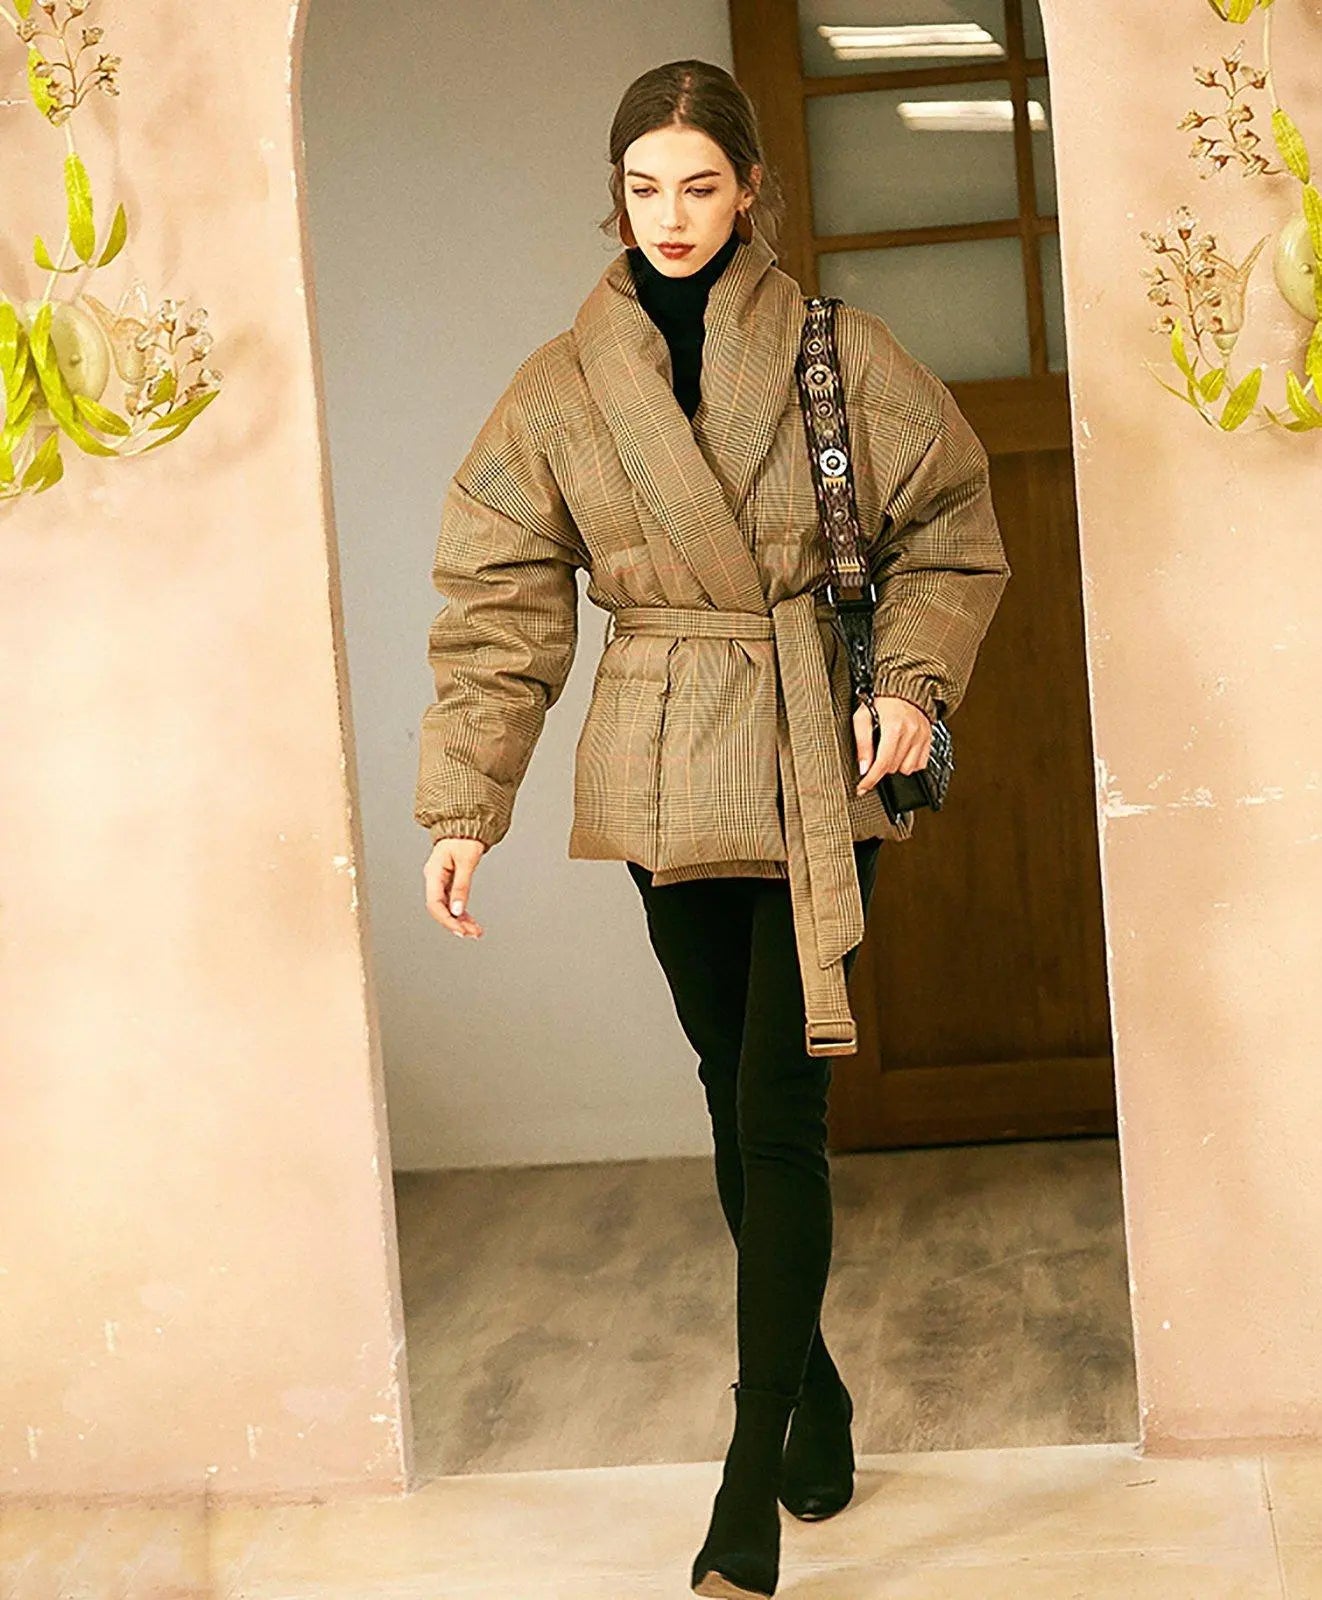 Women Plaid Down Coat,Wool Down Jacket,Wrap Down Coat,checkered Quilted Down Puffer Coat,Warm Puffy Coat,Down Jacket with belt,Winter Coat Vivian Seven